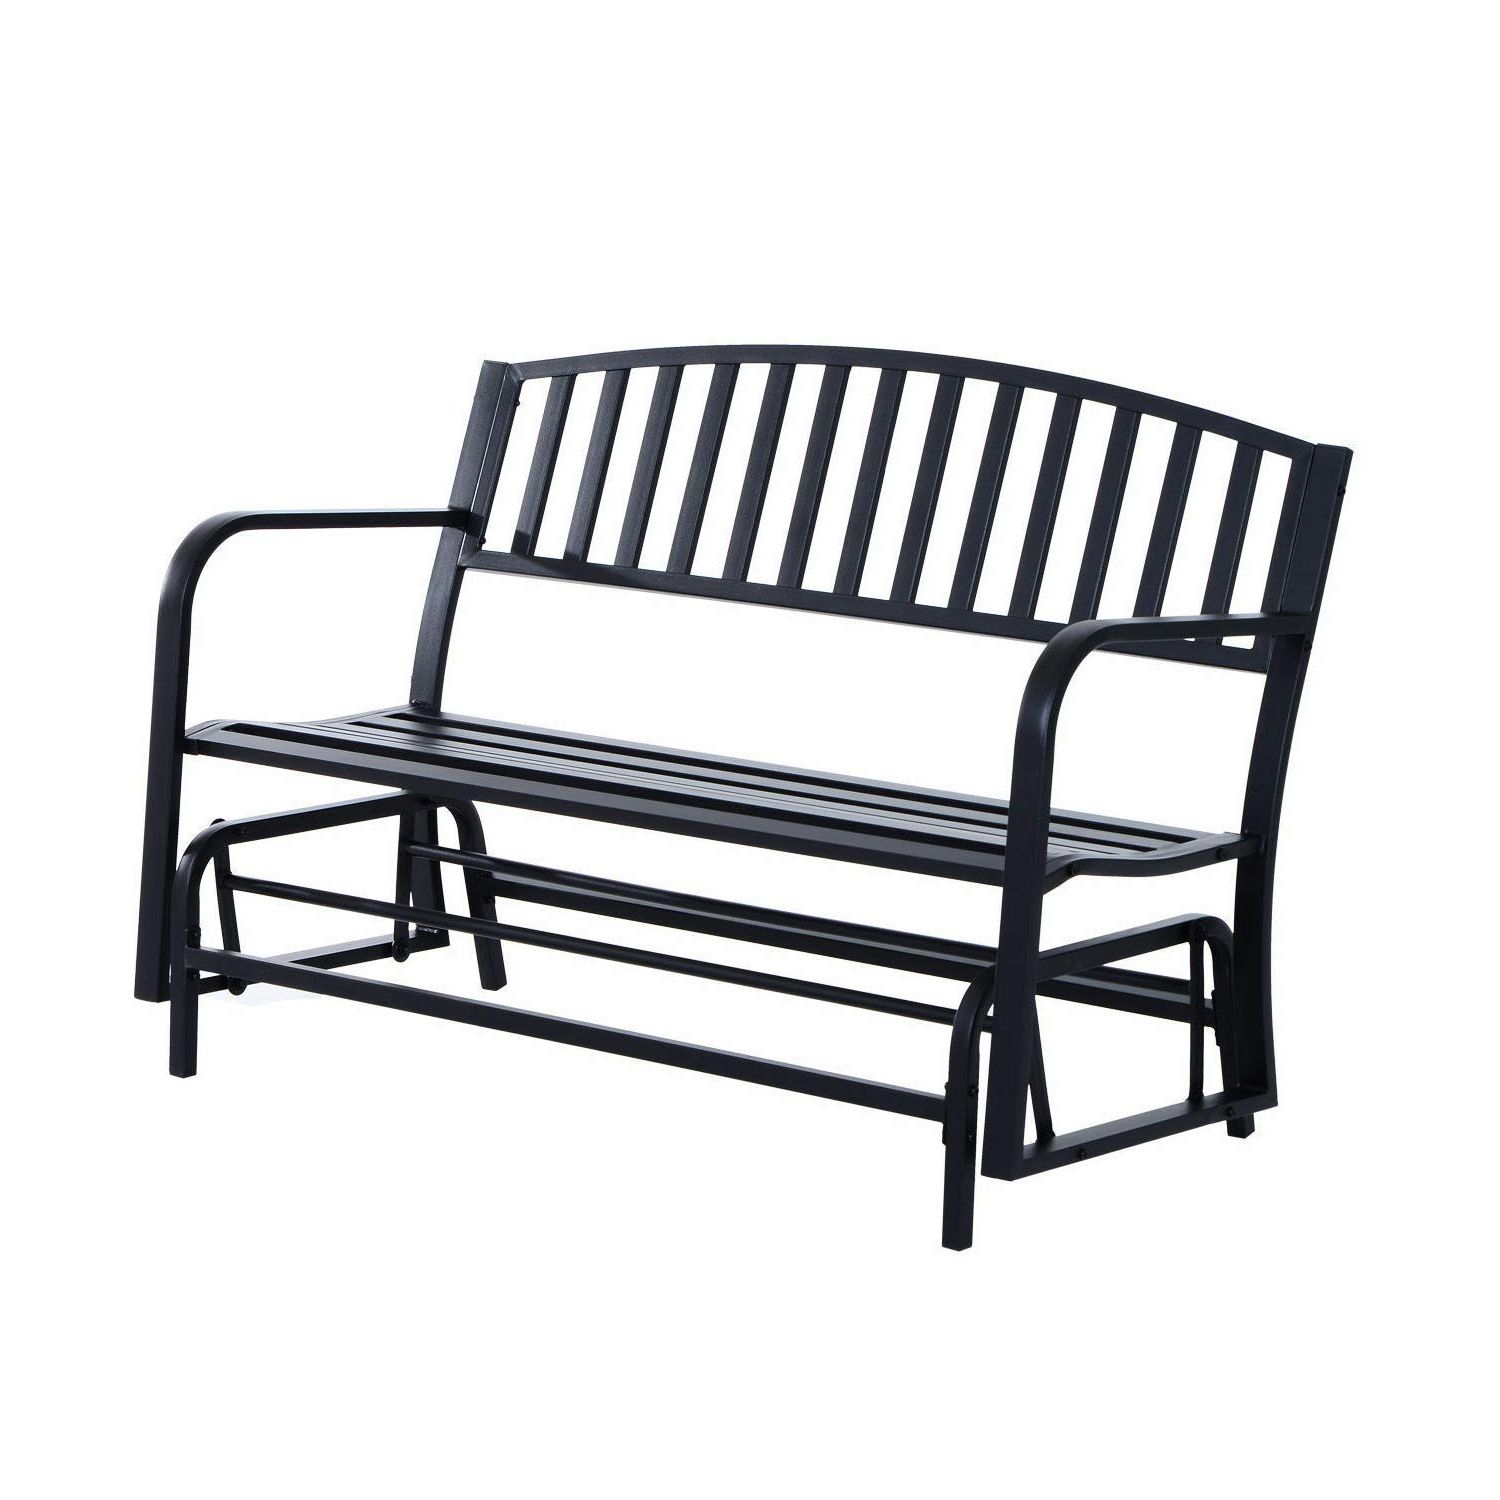 Newest Amazon : Black Patio Swing Glider Bench For 2 Persons Intended For Outdoor Patio Swing Glider Bench Chairs (View 3 of 30)